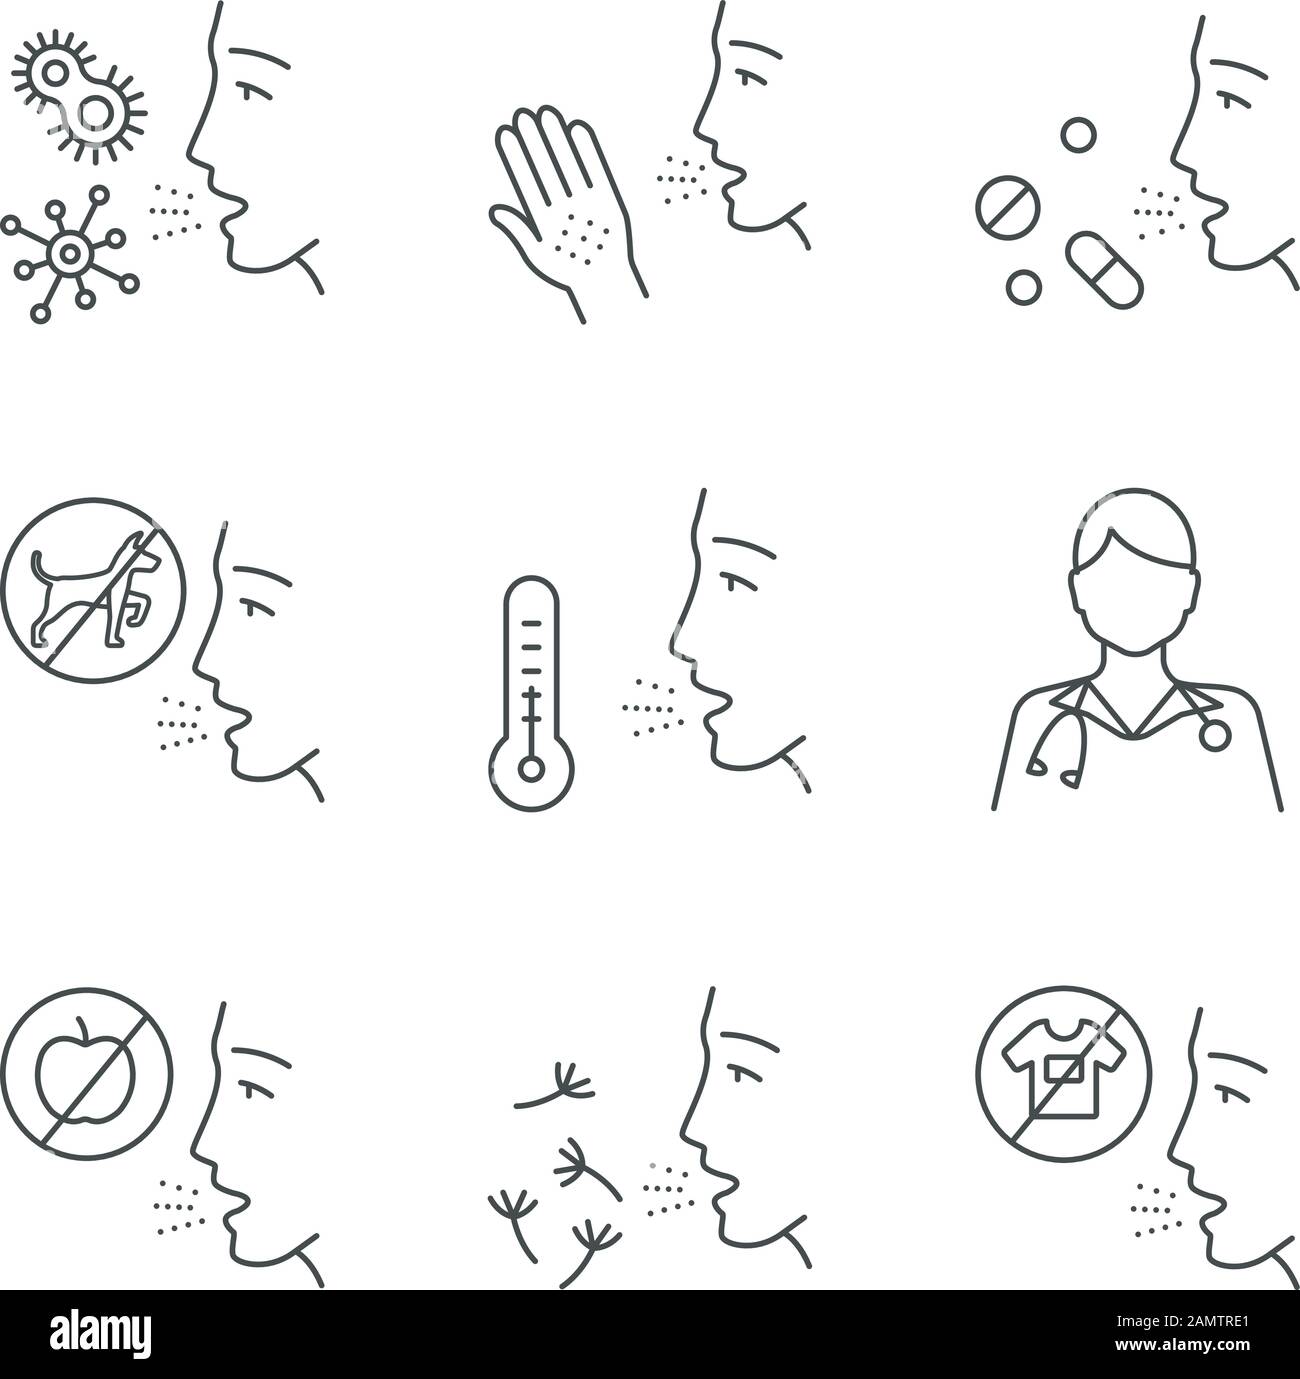 Allergies linear icons set. Contact, food, respiratory diseases. Allergen sources. Diagnosis and medication. Thin line contour symbols. Isolated vecto Stock Vector